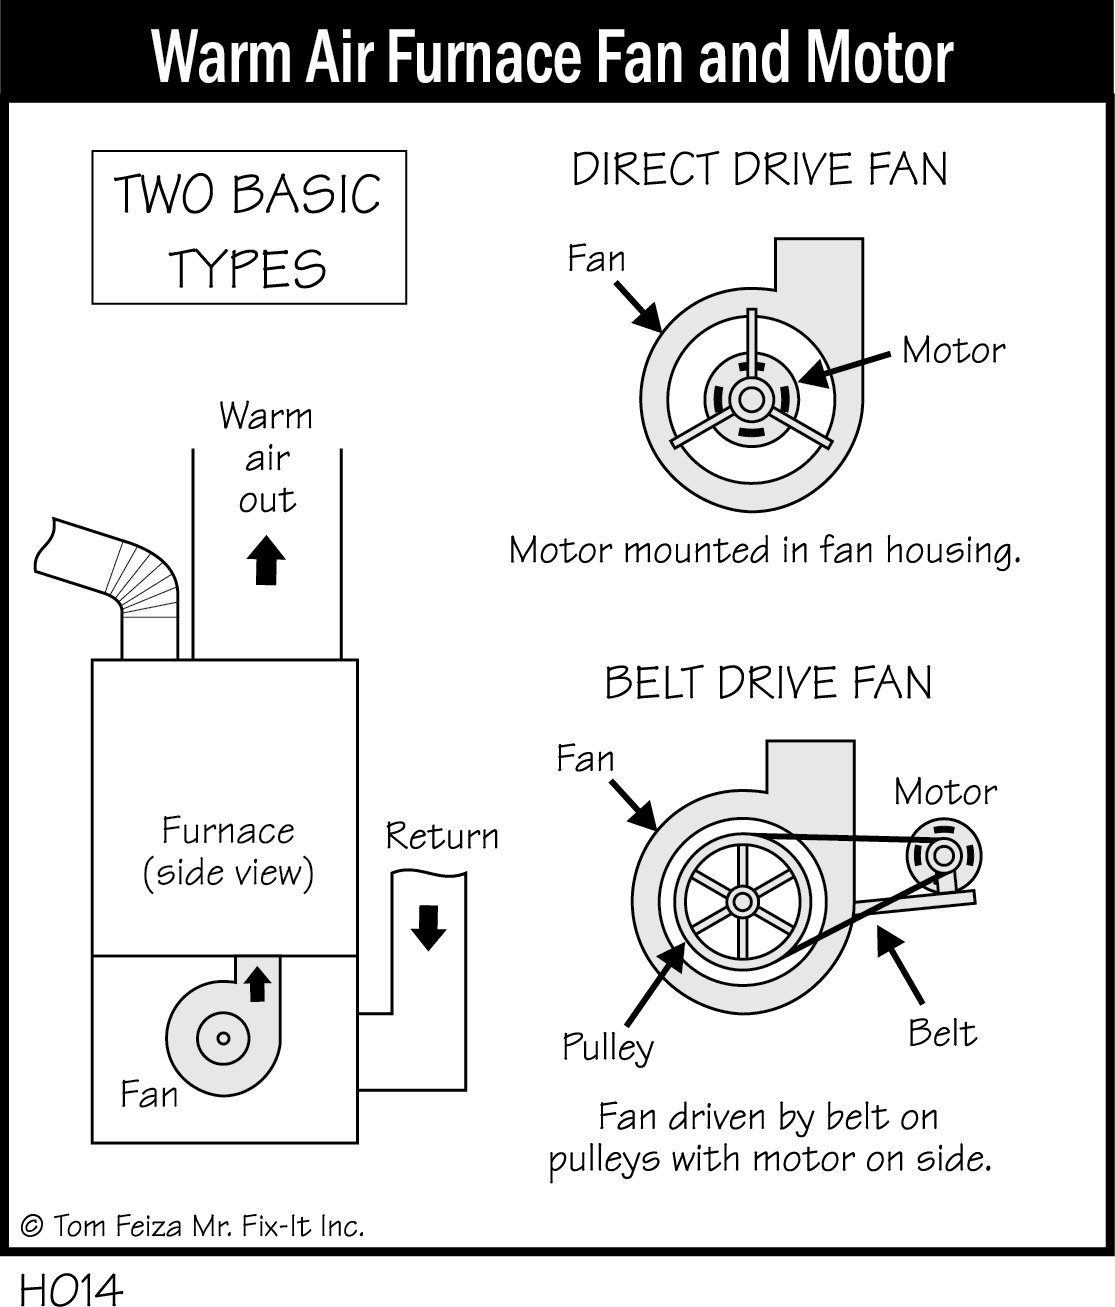 H014 - Warm Air Furnace Fan and Motor